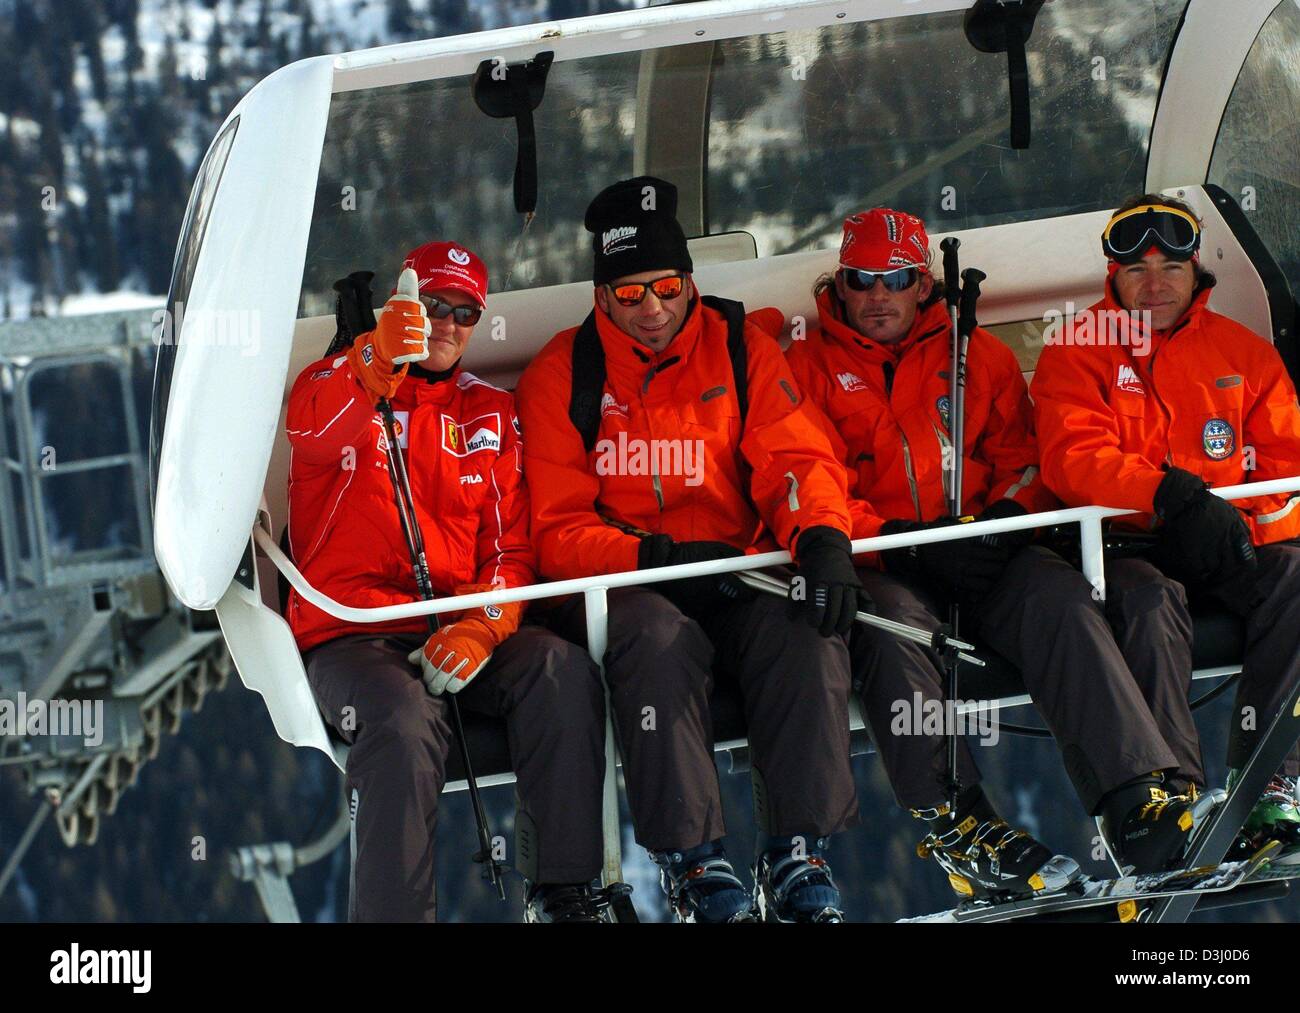 (dpa) - German formula one world champion Michael Schumacher (L) gives the thumbs up sign while being carried uphill in a chair-lift with his skiing instructor and bodyguards, near the ski resort Madonna di Campiglio, Italy, 15 January 2004. The Ferrari racing team in Madonna di Campiglio meets for a traditional skiing holiday under the motto 'Wrooom'. Stock Photo